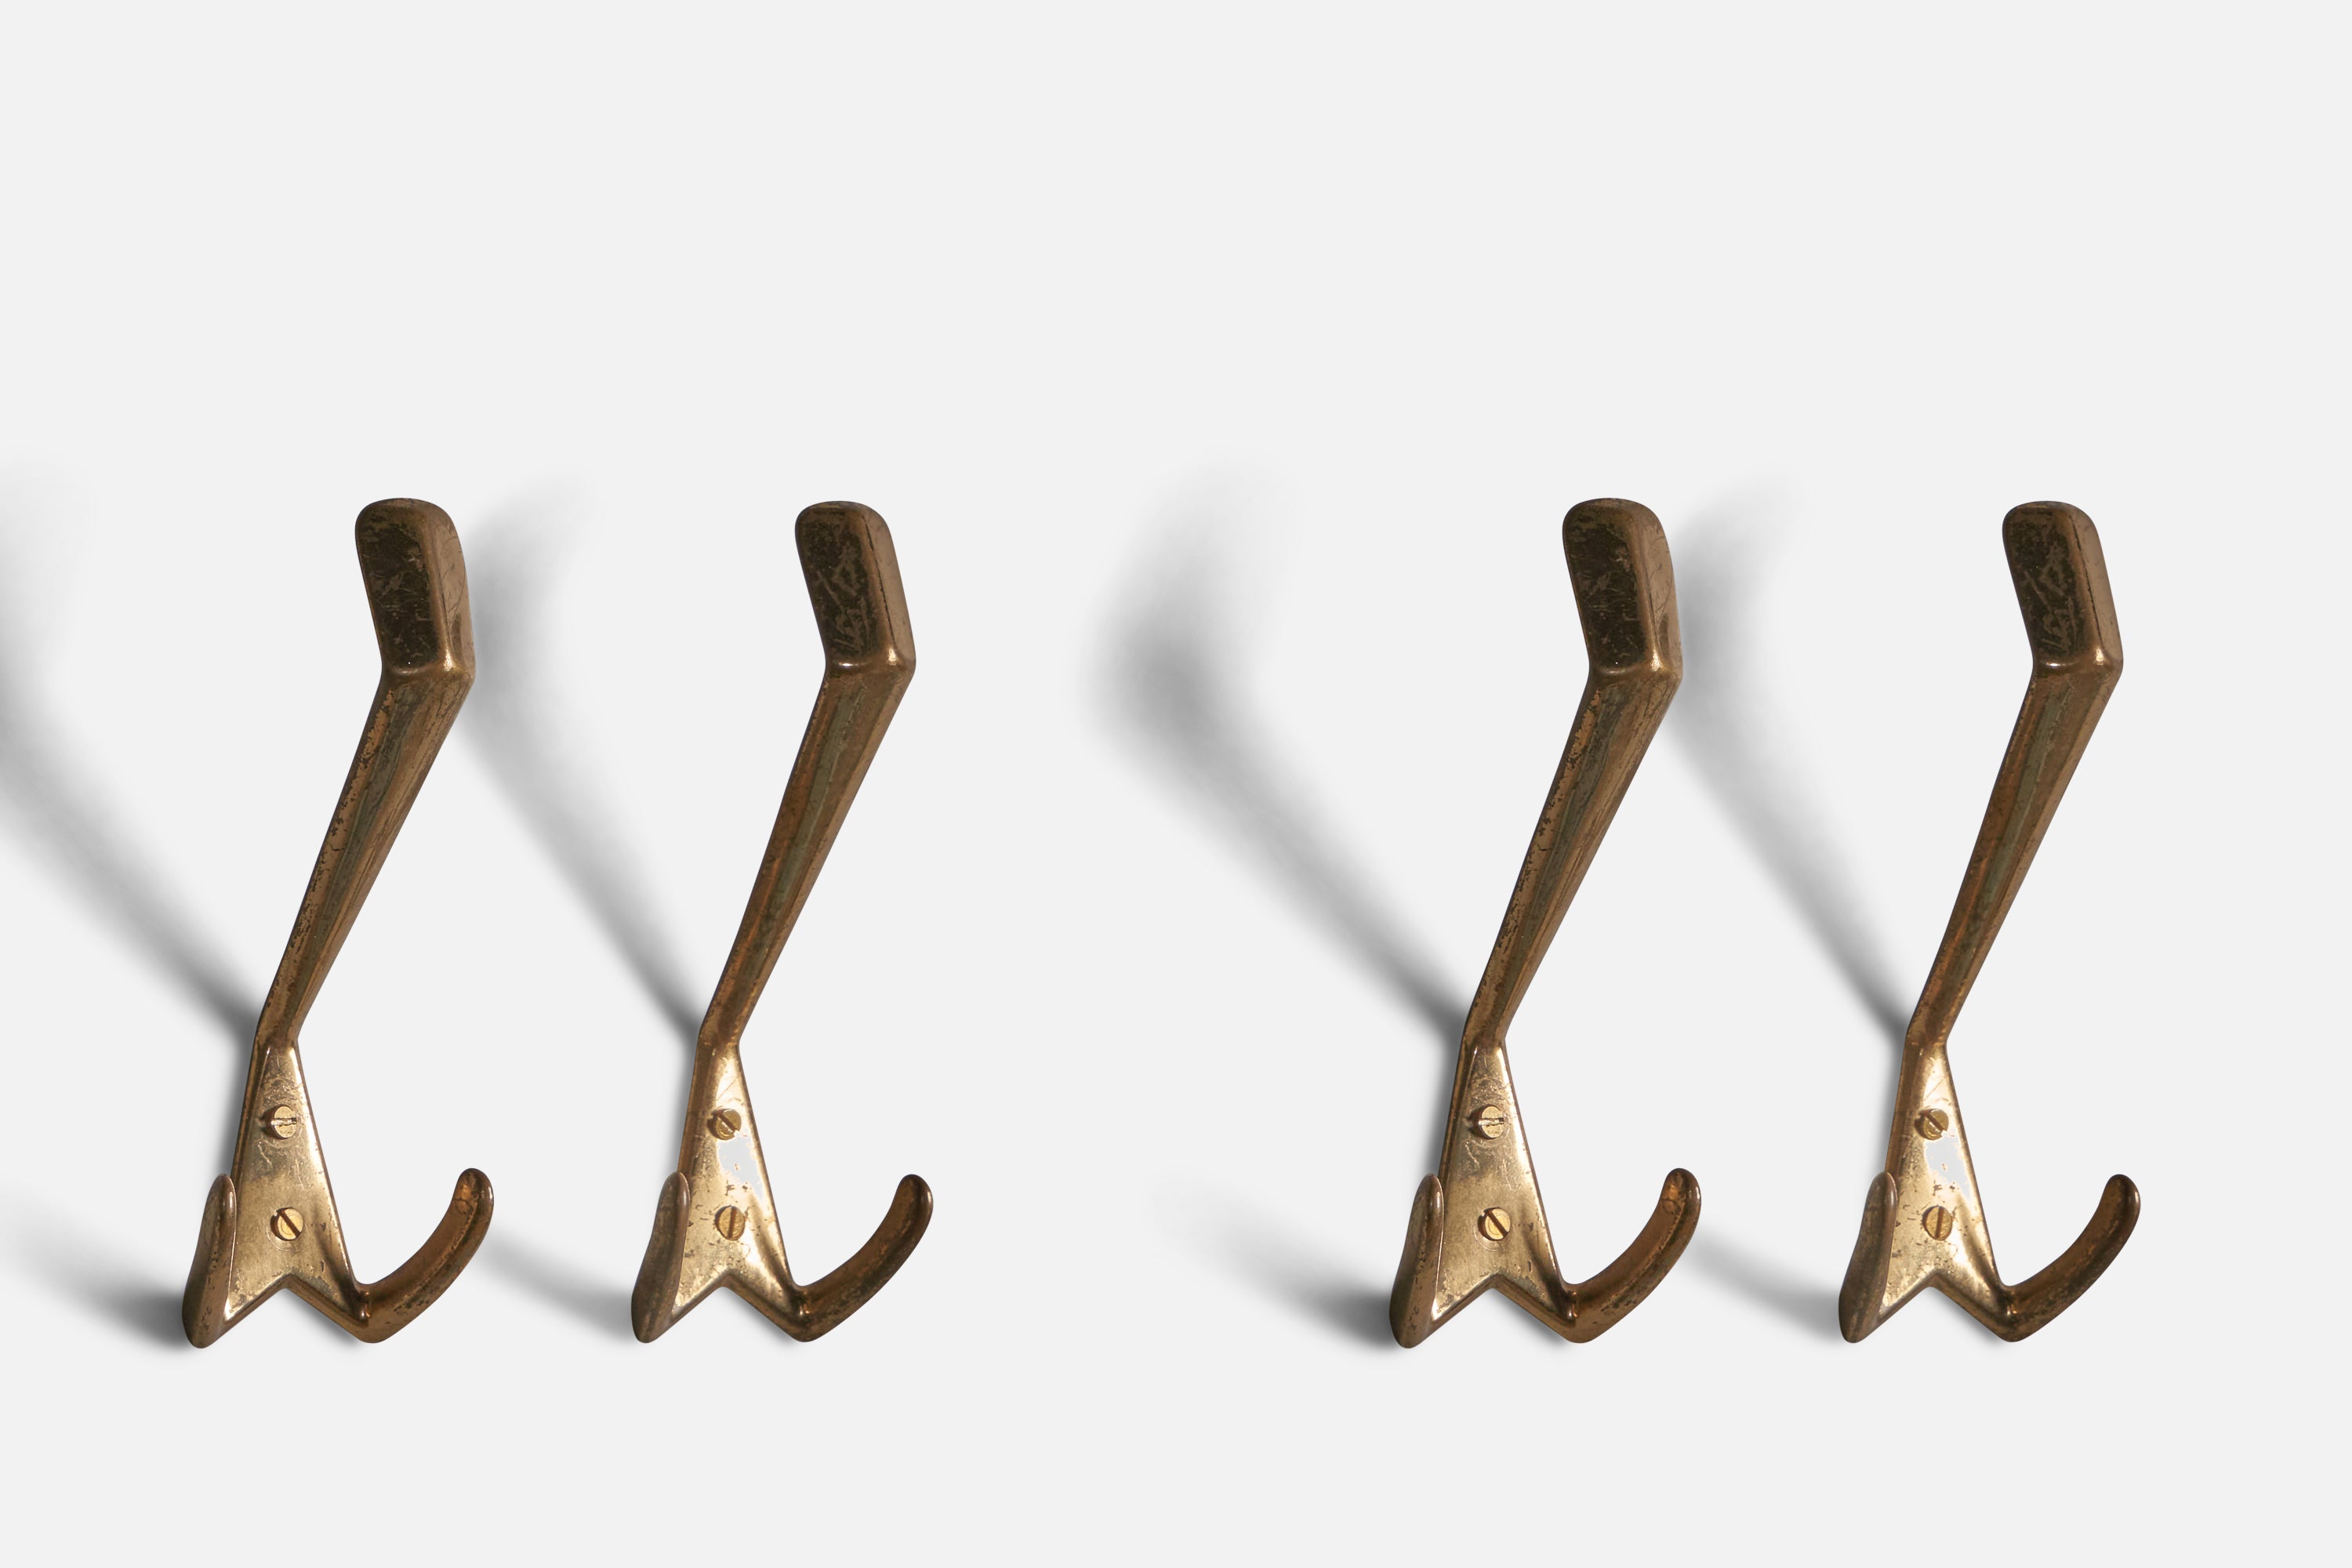 A set of 4 brass coat hangers, designed and produced in Italy, 1940s.